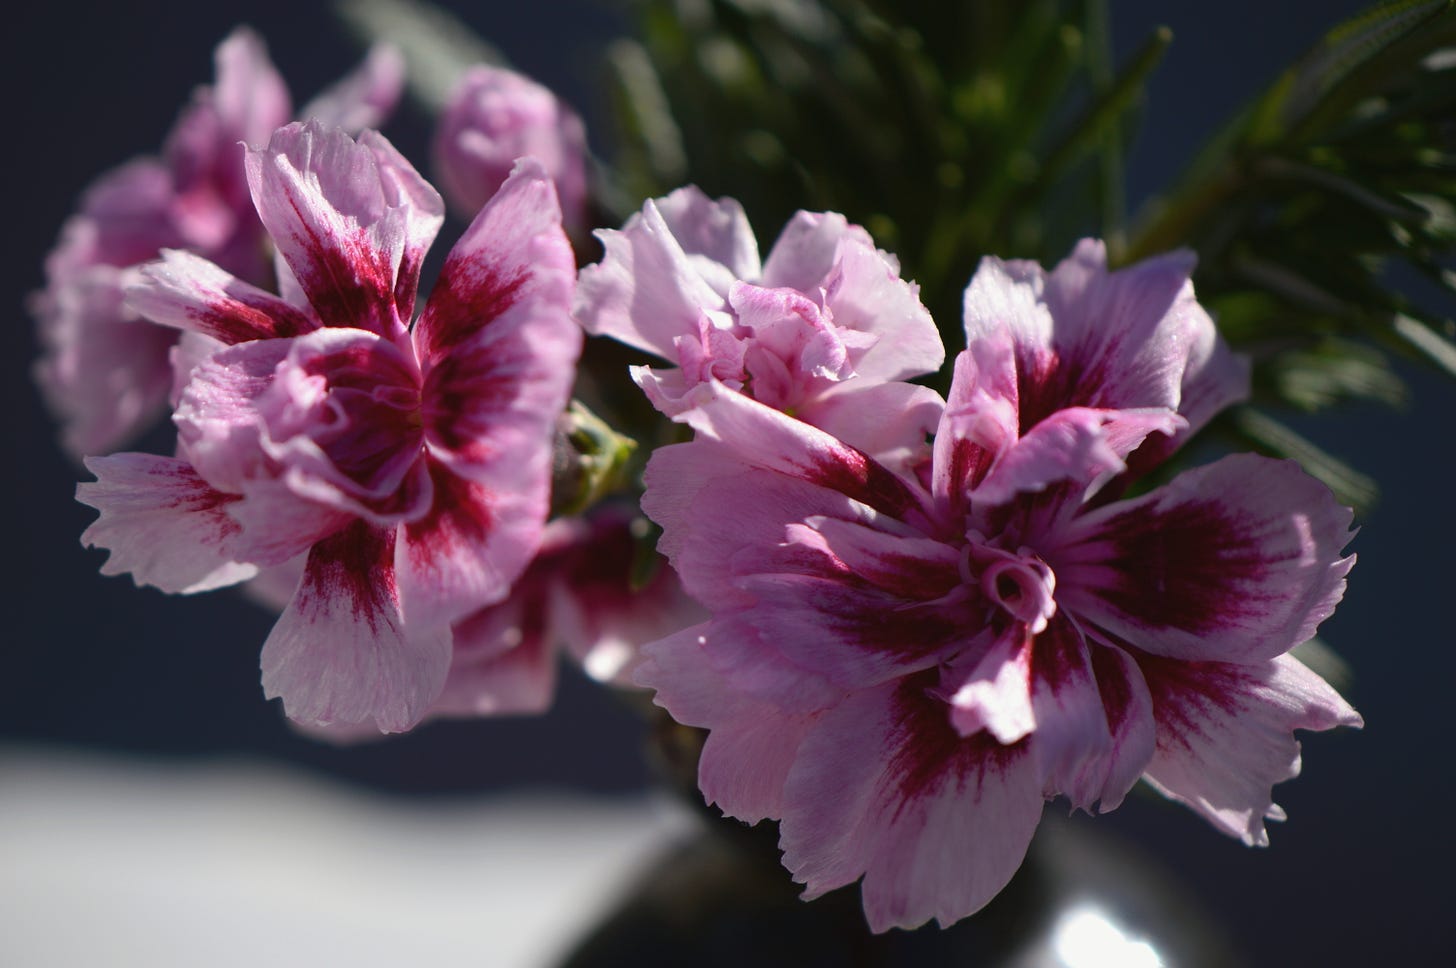 carnations in a vase